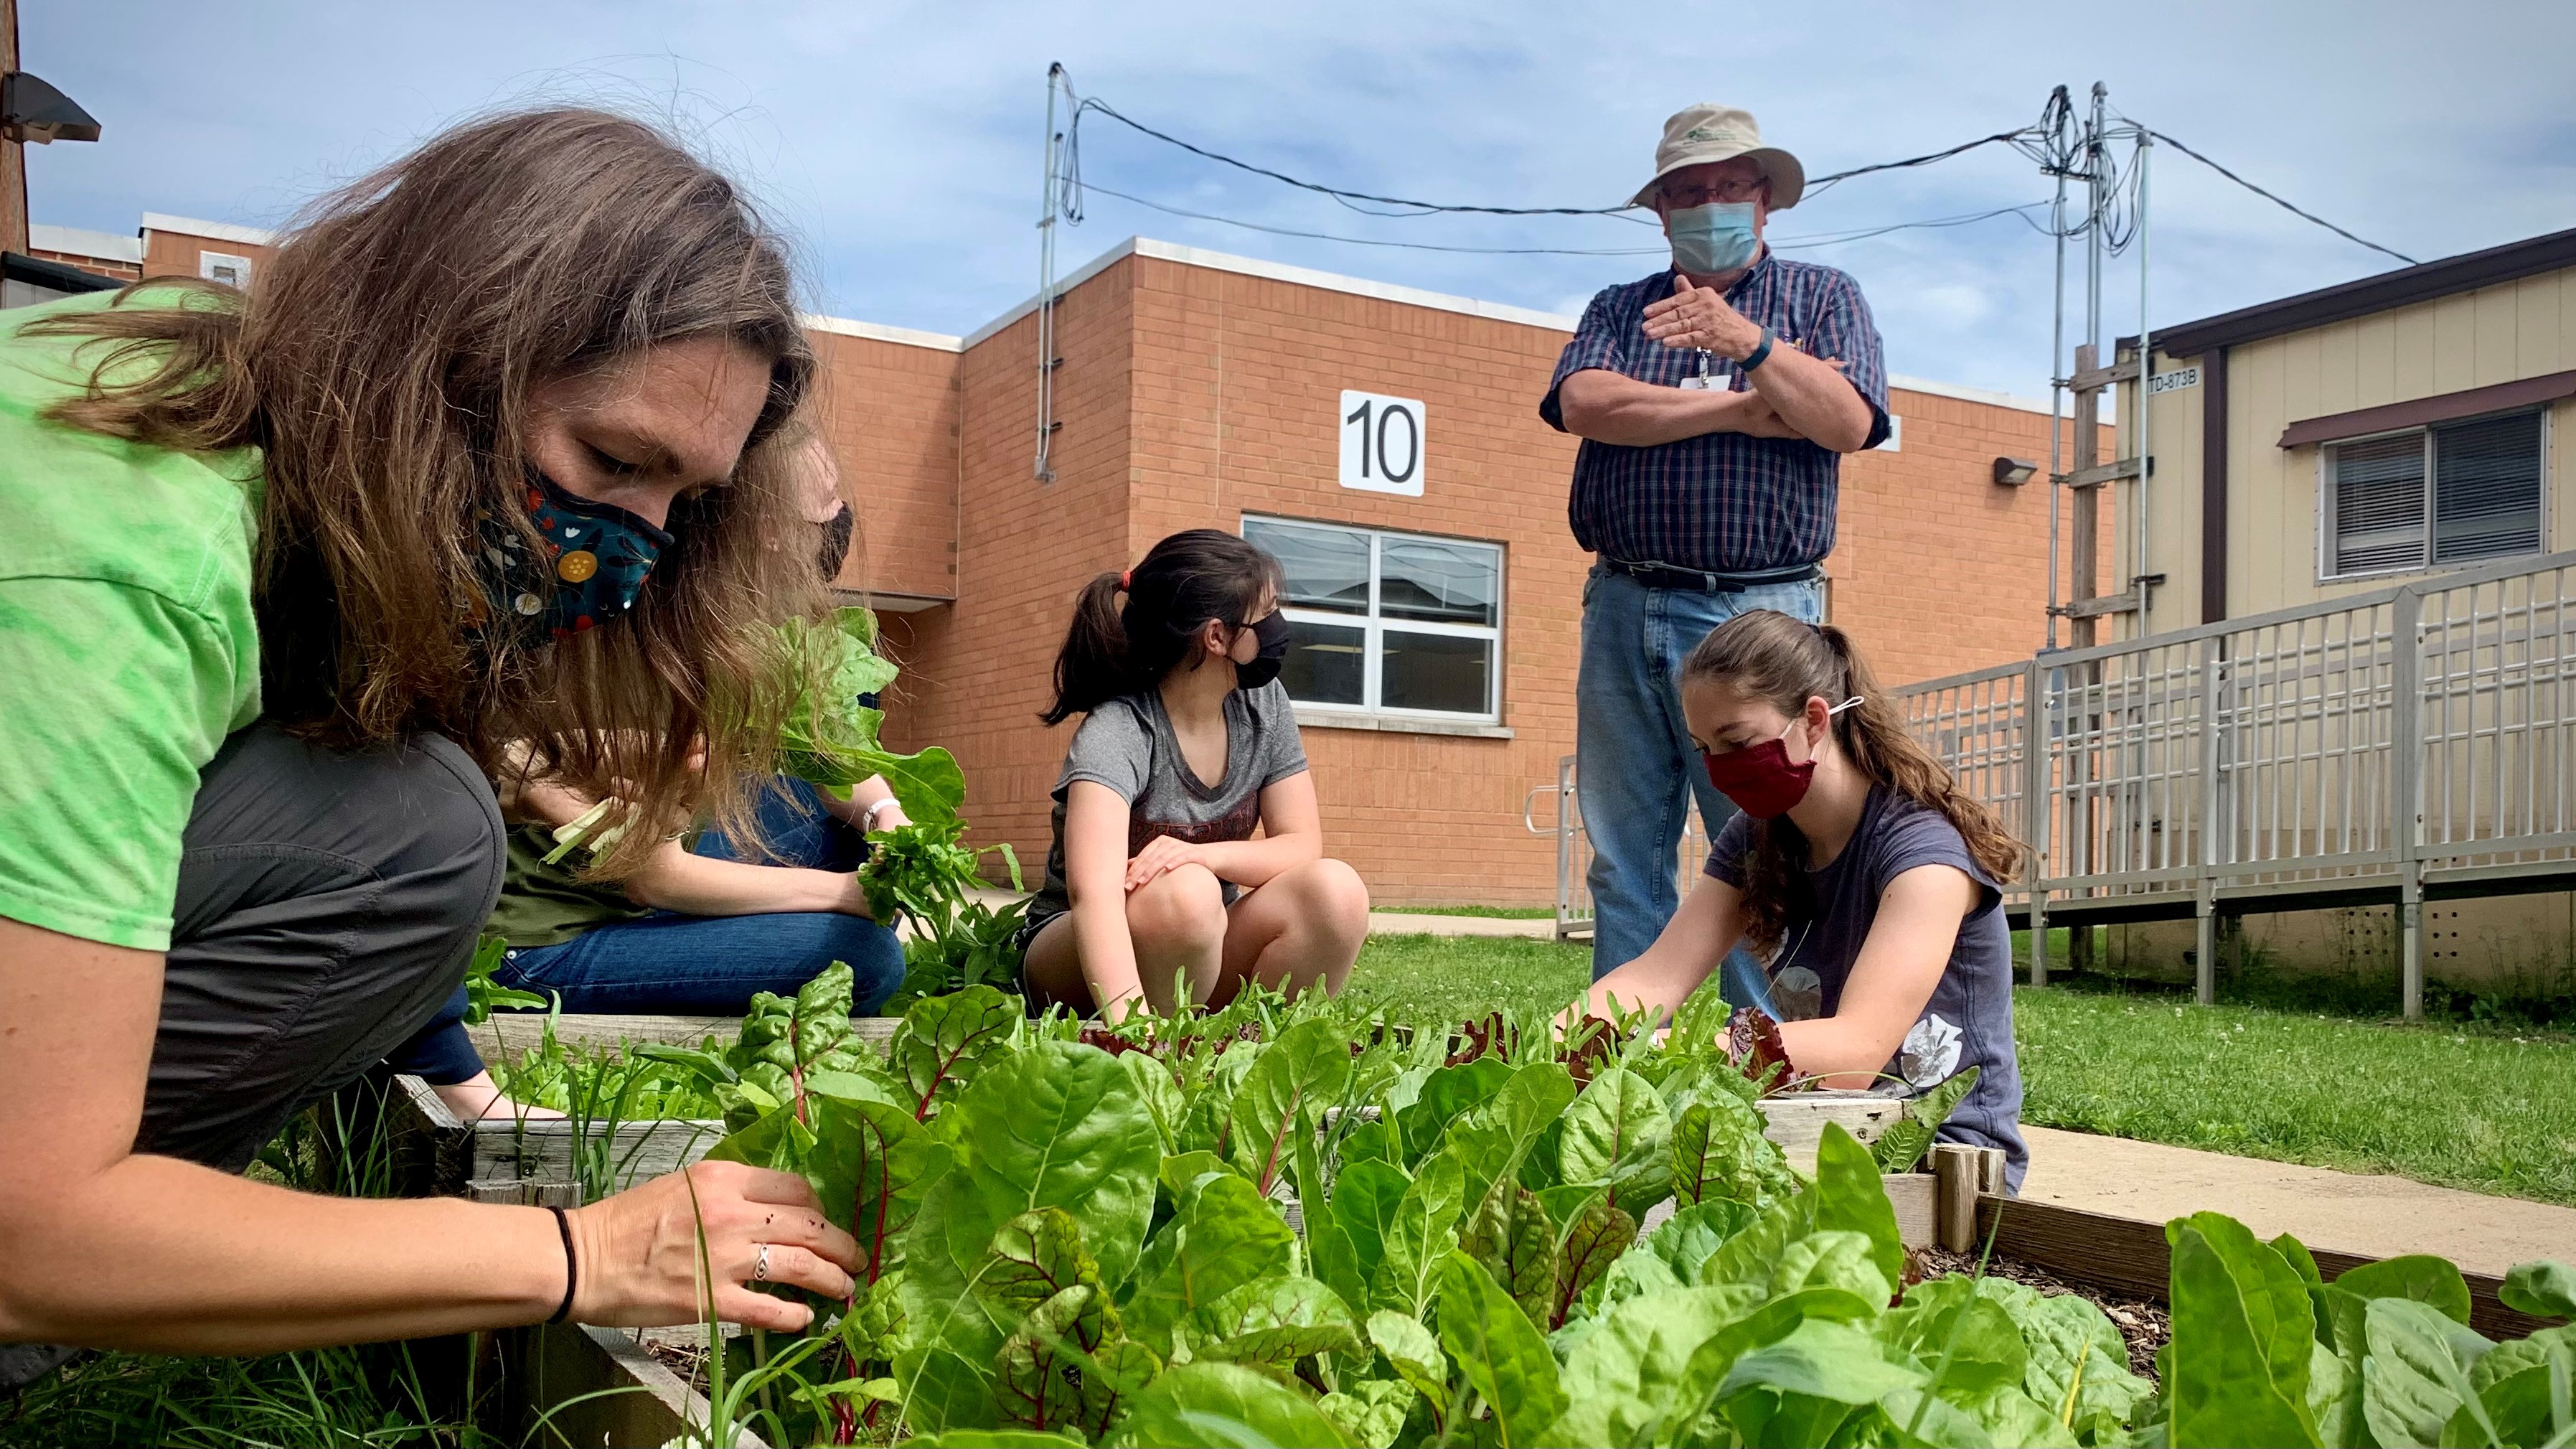 Master Gardener Tony Makara guides students as they weed and harvest.